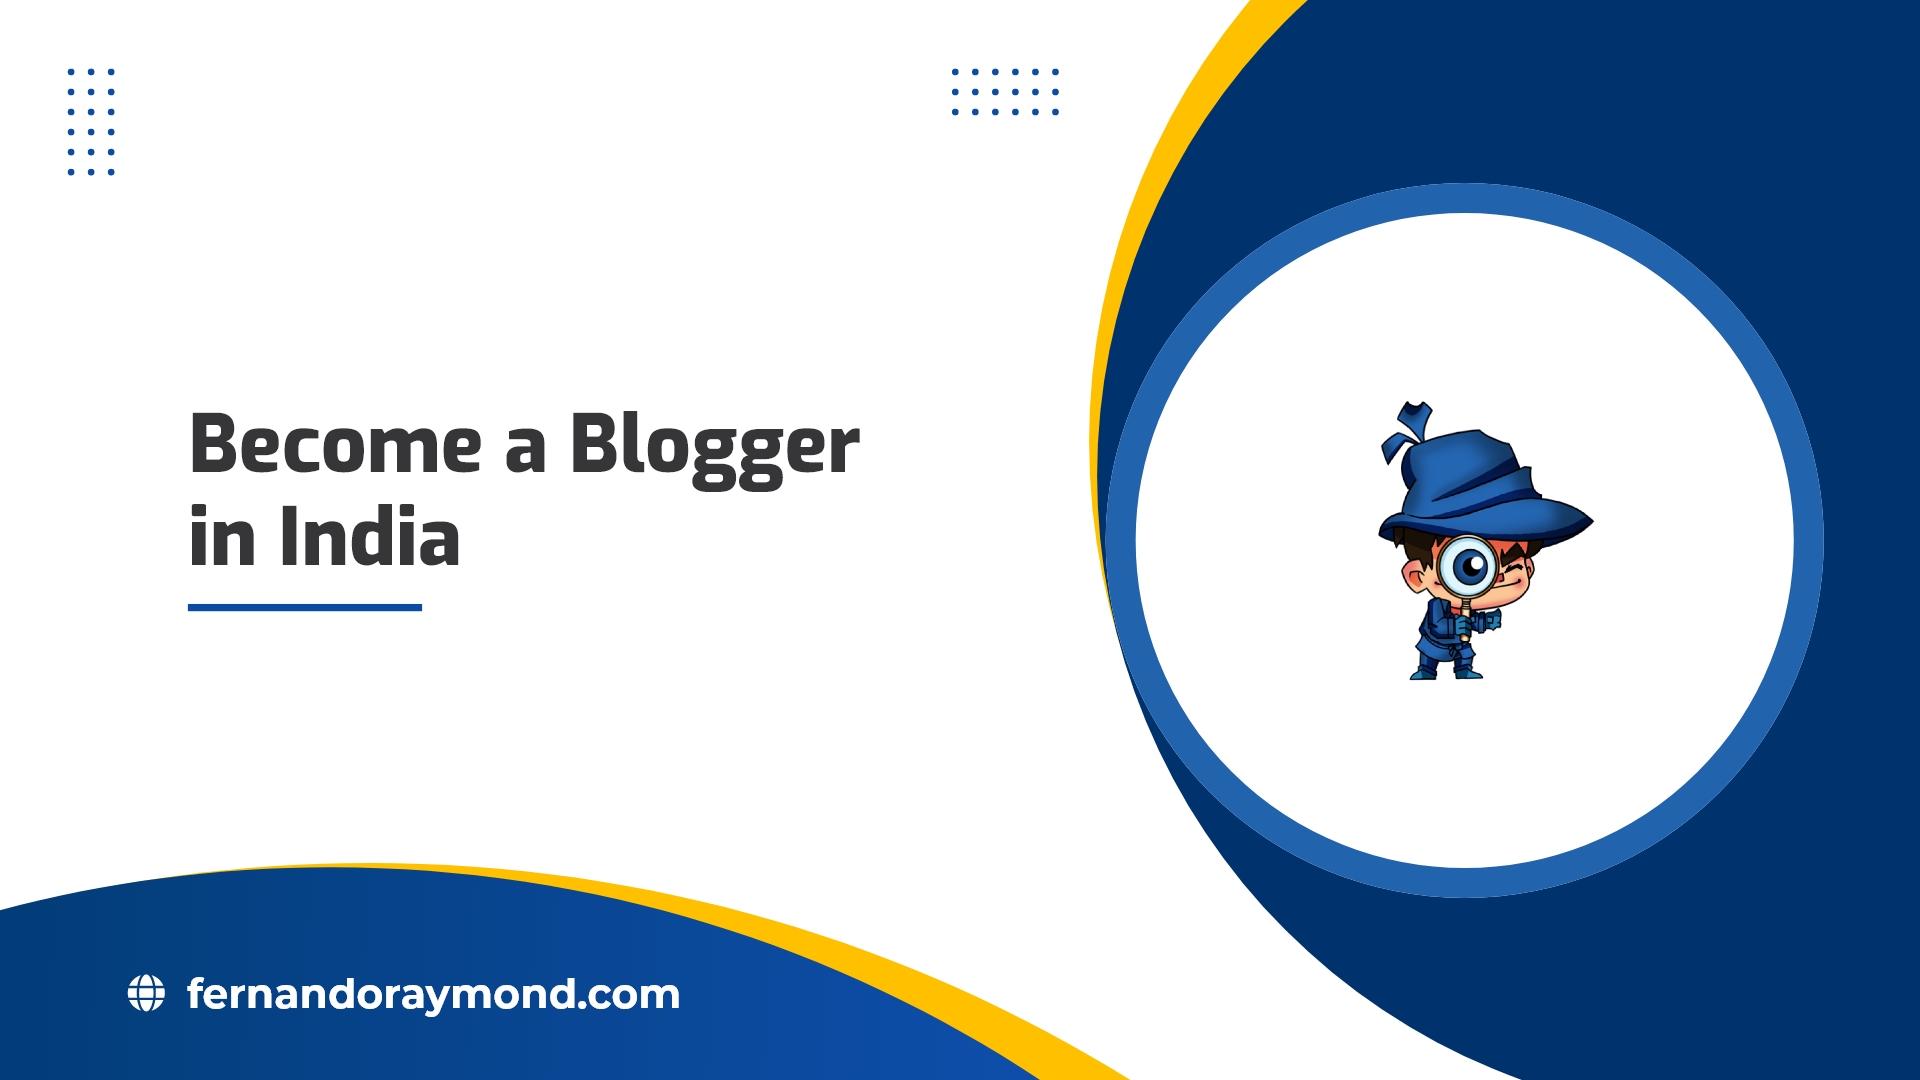 How To Become A Blogger In India?